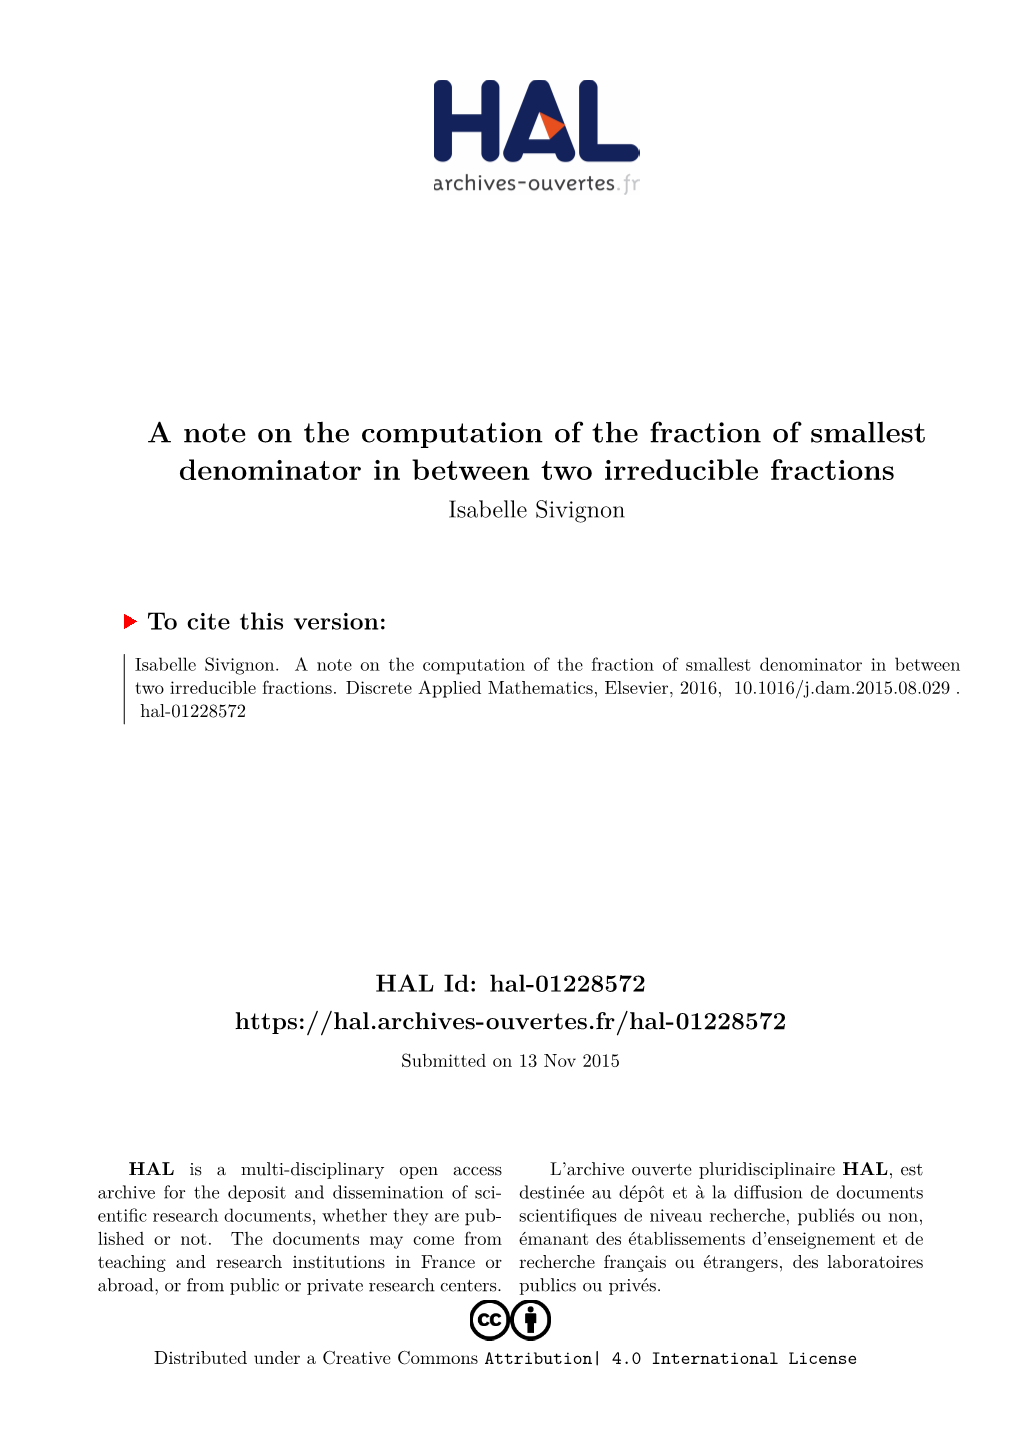 A Note on the Computation of the Fraction of Smallest Denominator in Between Two Irreducible Fractions Isabelle Sivignon